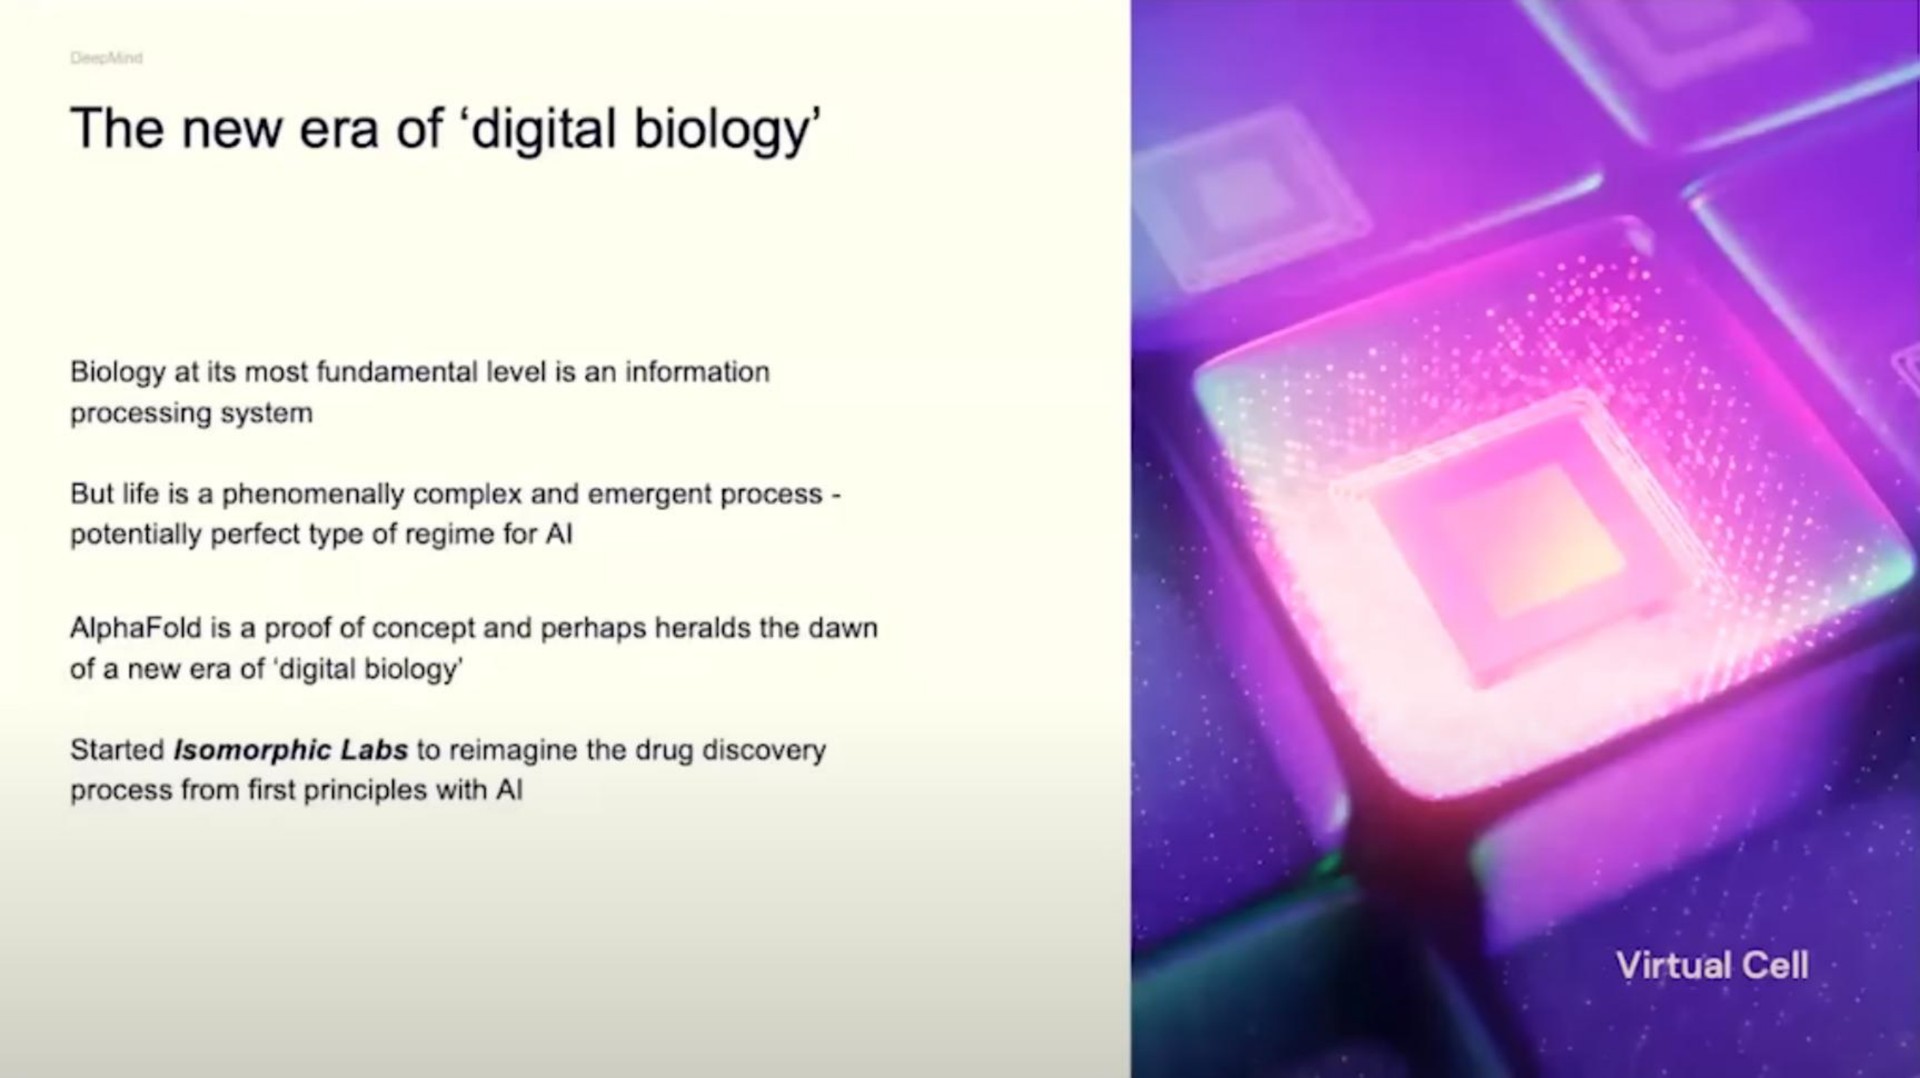 the new era of digital biology biology at its most fundamental level is an information processing system but life is a phenomenally complex and emergent process potentially perfect type of regime for is a proof of concept and perhaps heralds the dawn of a new era of digital biology started isomorphic labs to reimagine the drug discovery process from first principles with virtual cell | DeepMind